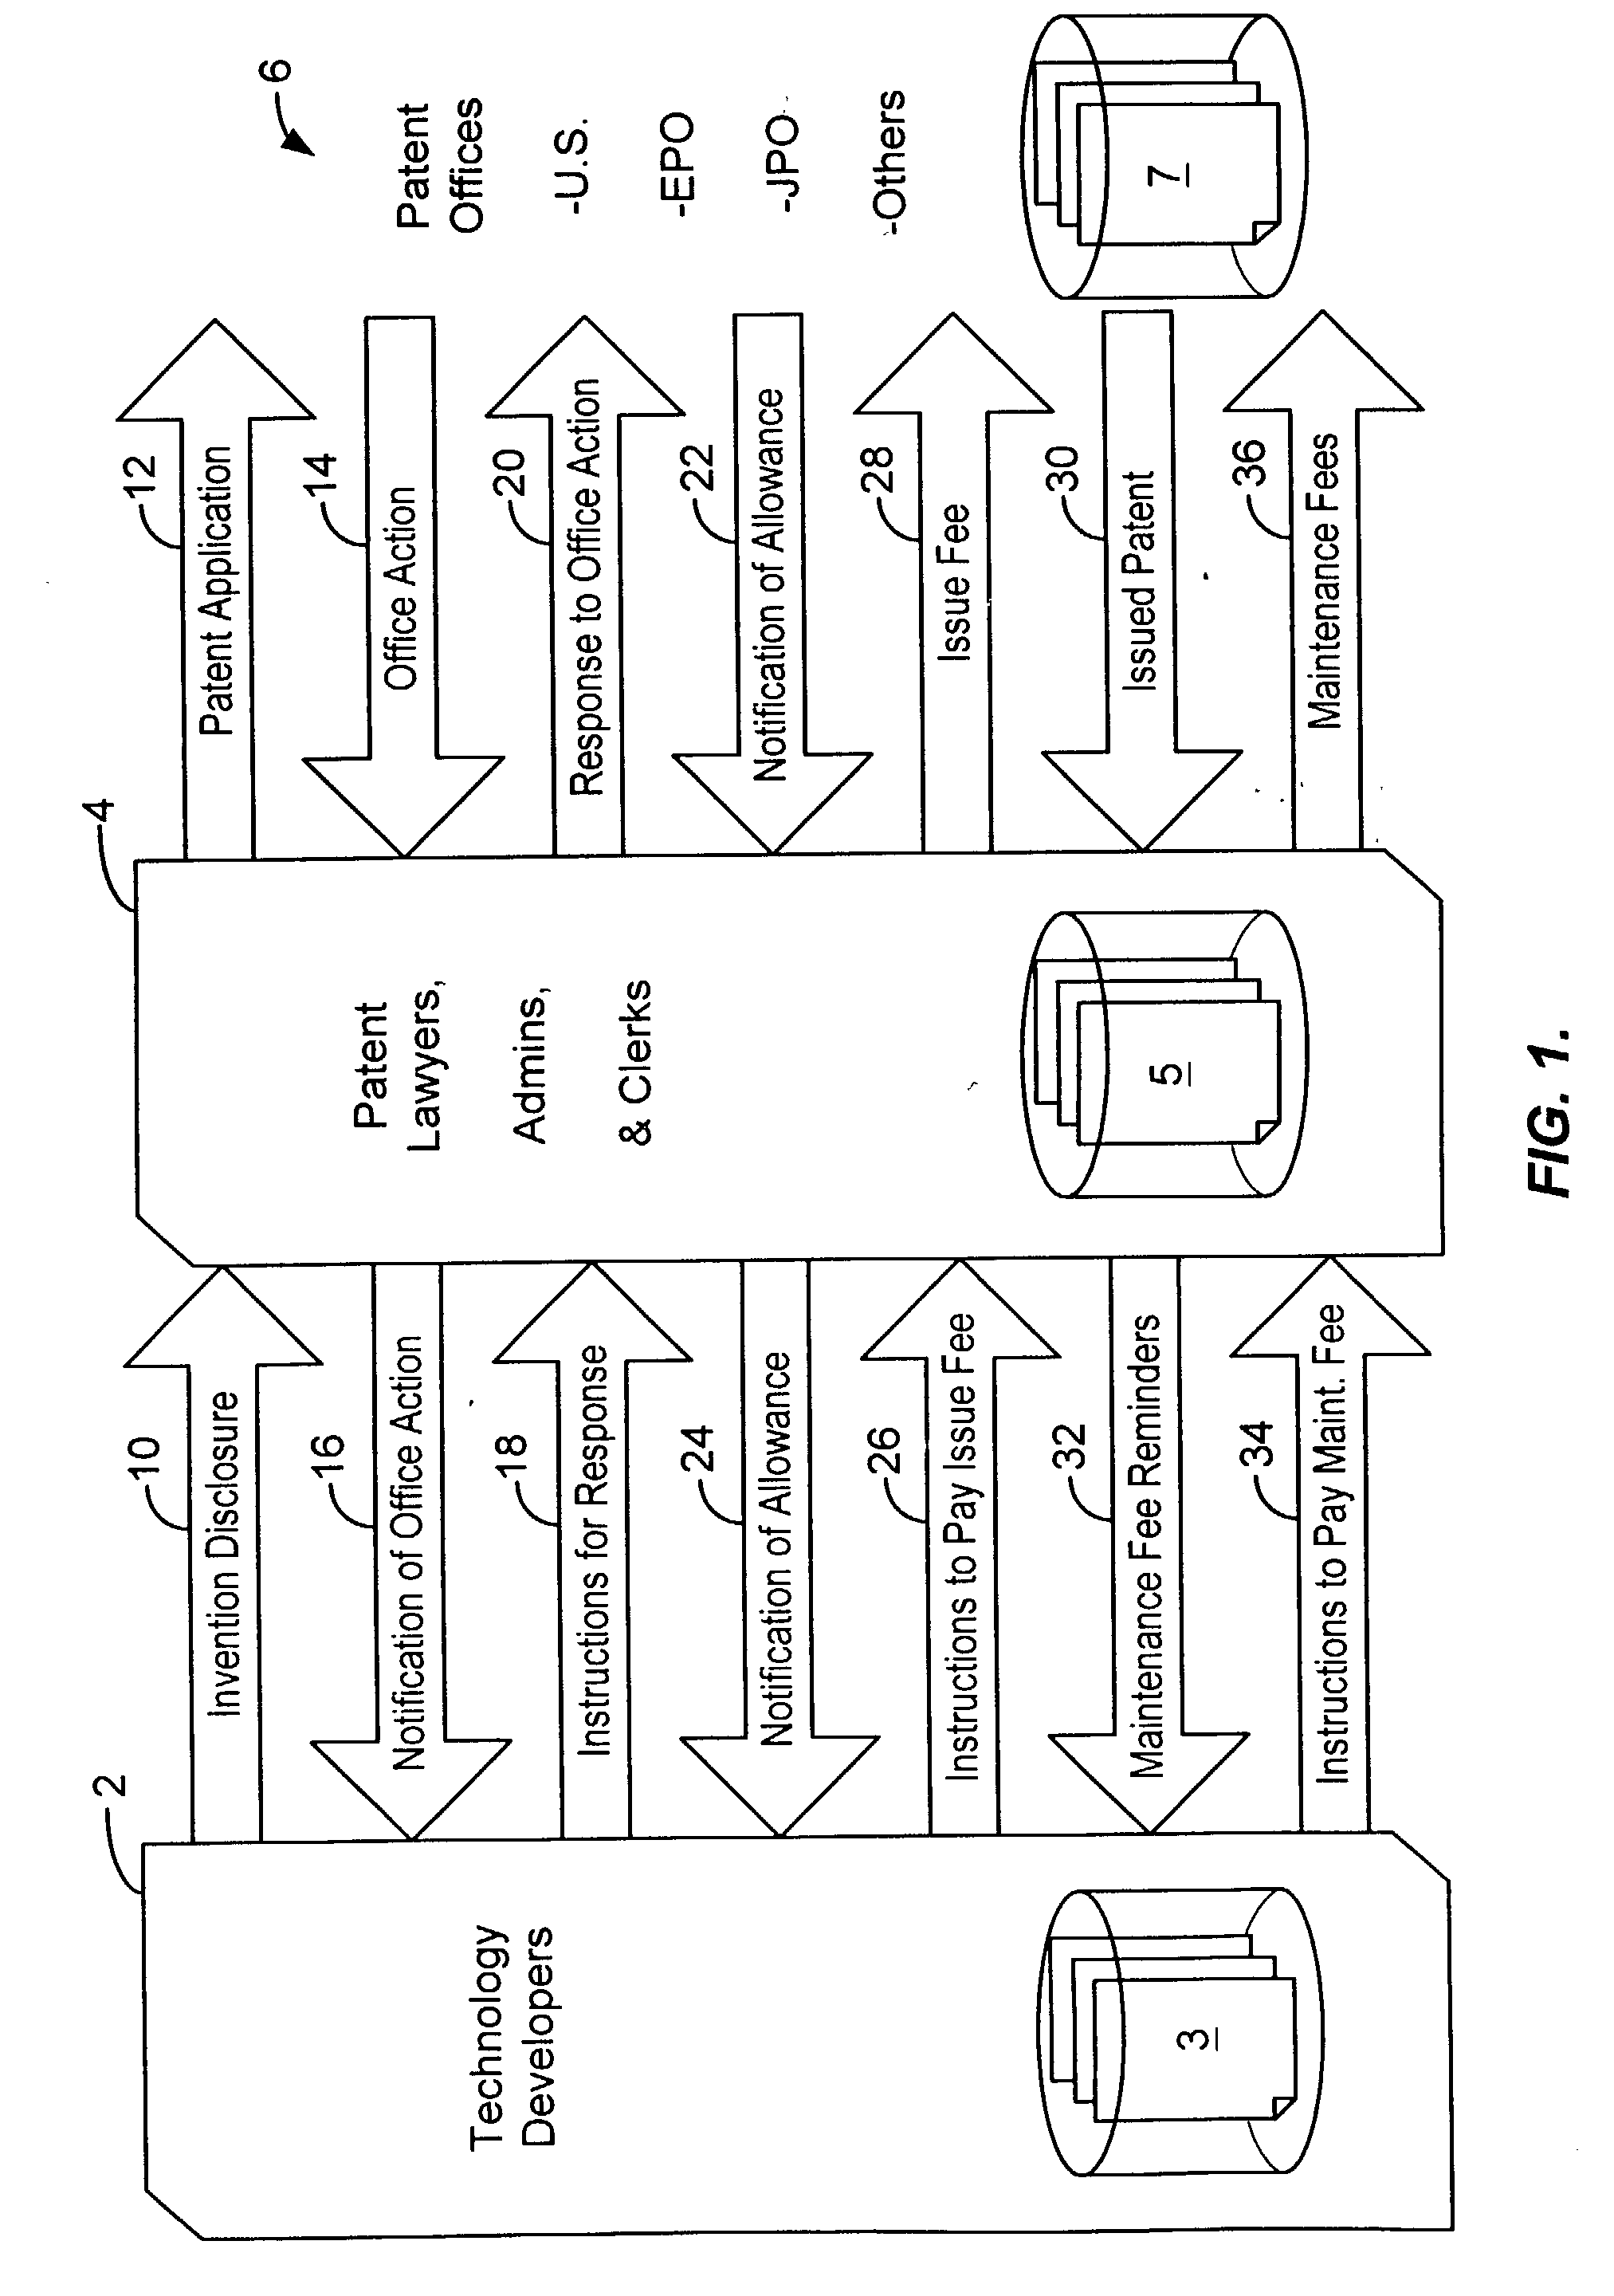 Method of creating electronic prosecution experience for patent applicant